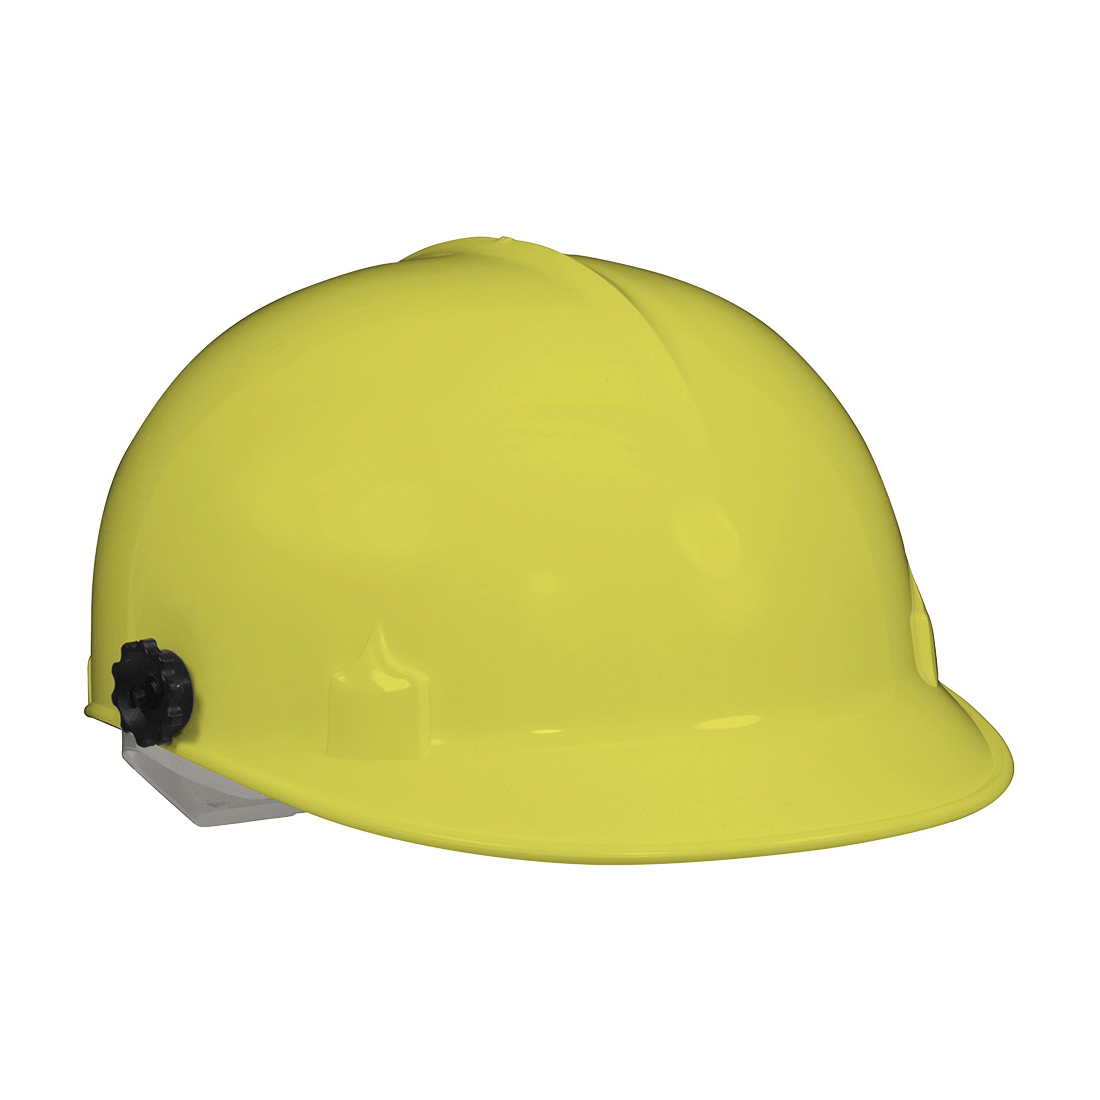 Jackson Safety* 20187 BC100 Lightweight Bump Cap With Faceshield Attachment, Yellow, HDPE, 4-Point Pinlock Suspension redirect to product page